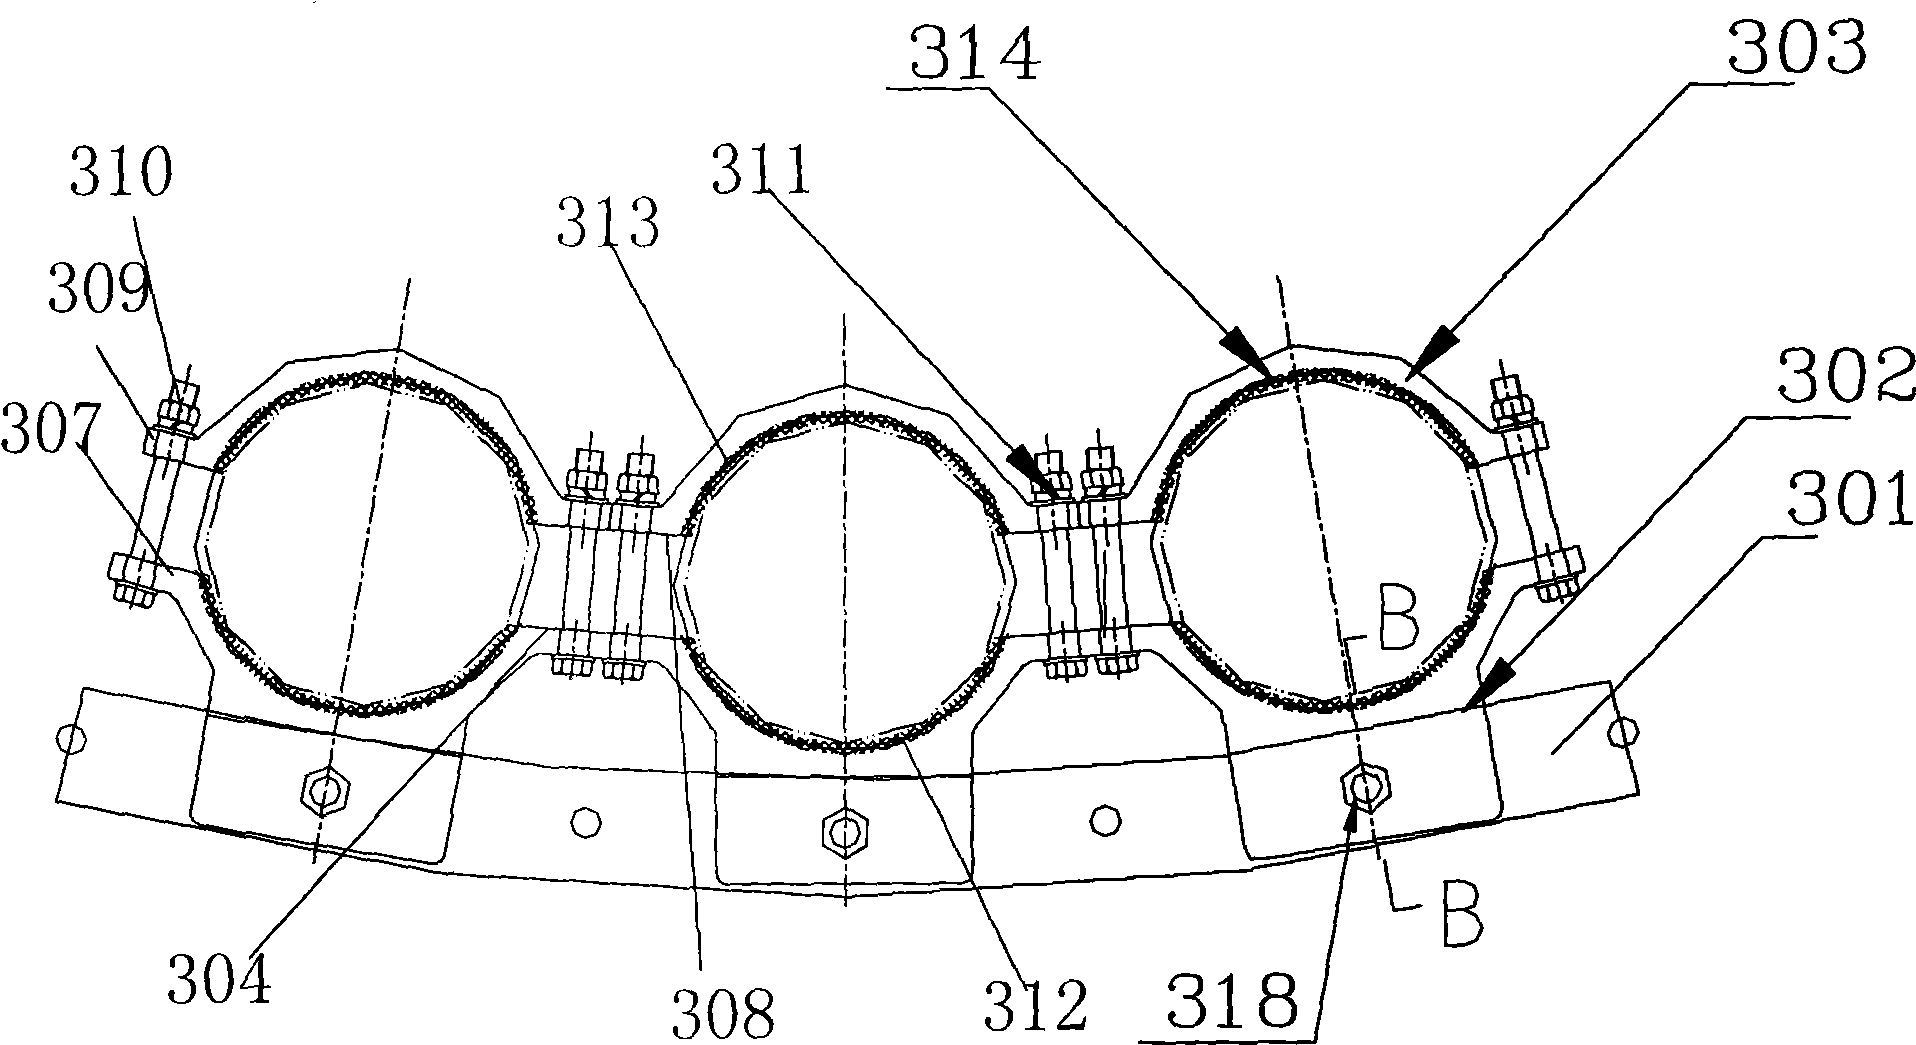 Tunnel ring-shaped deployment for electric cable with large cross-section